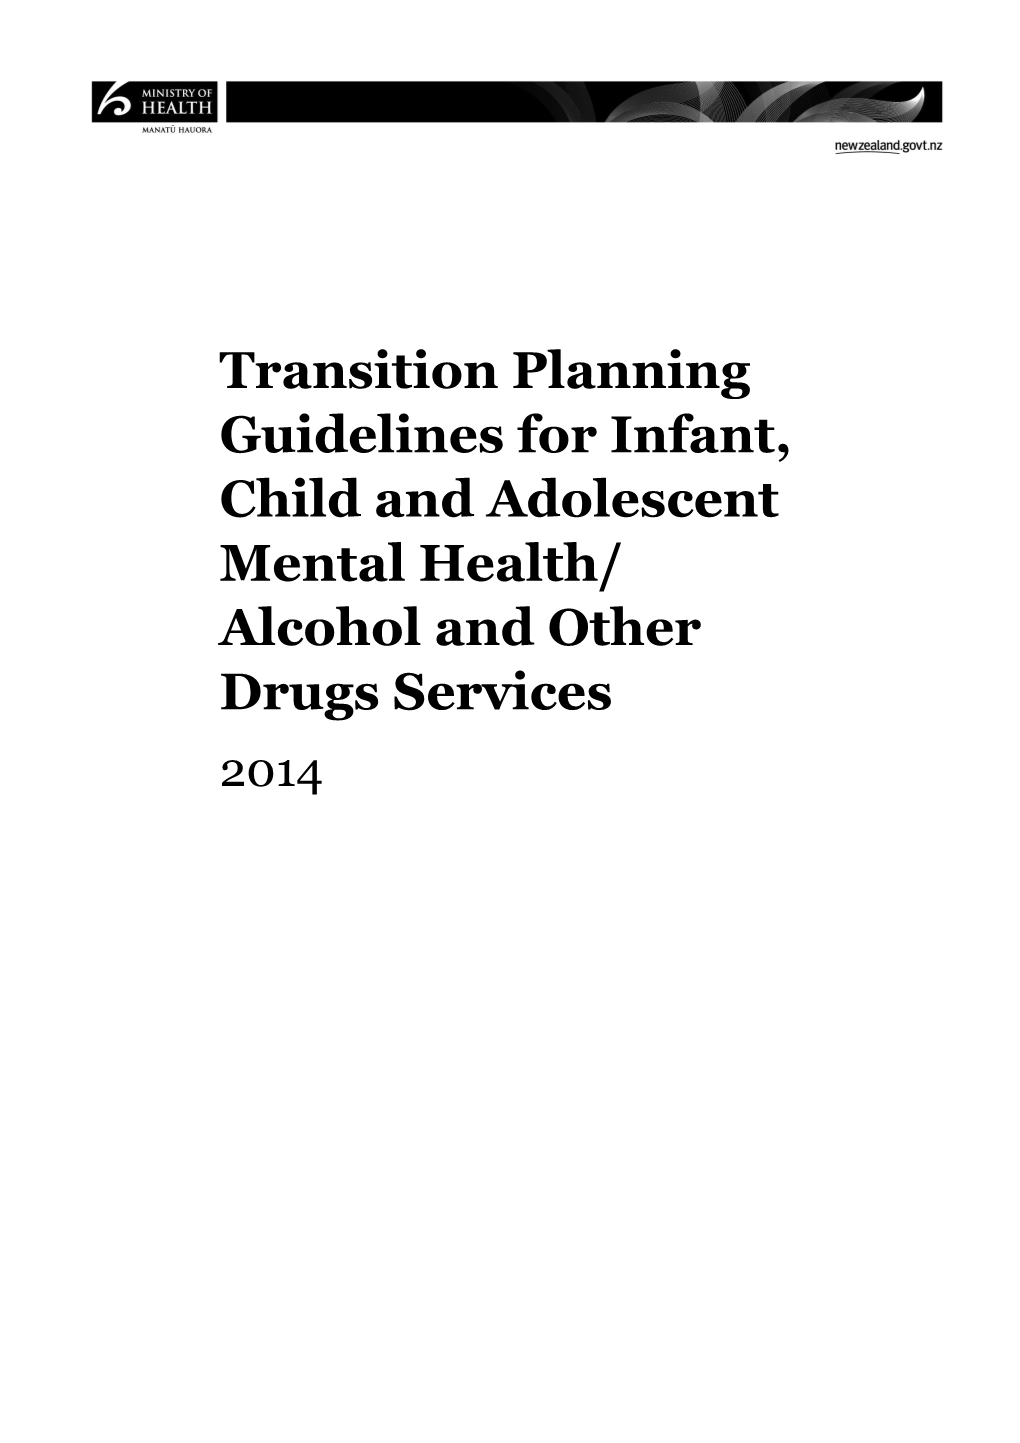 Transition Planning Guidelines for Infant, Child and Adolescent Mental Health/ Alcohol